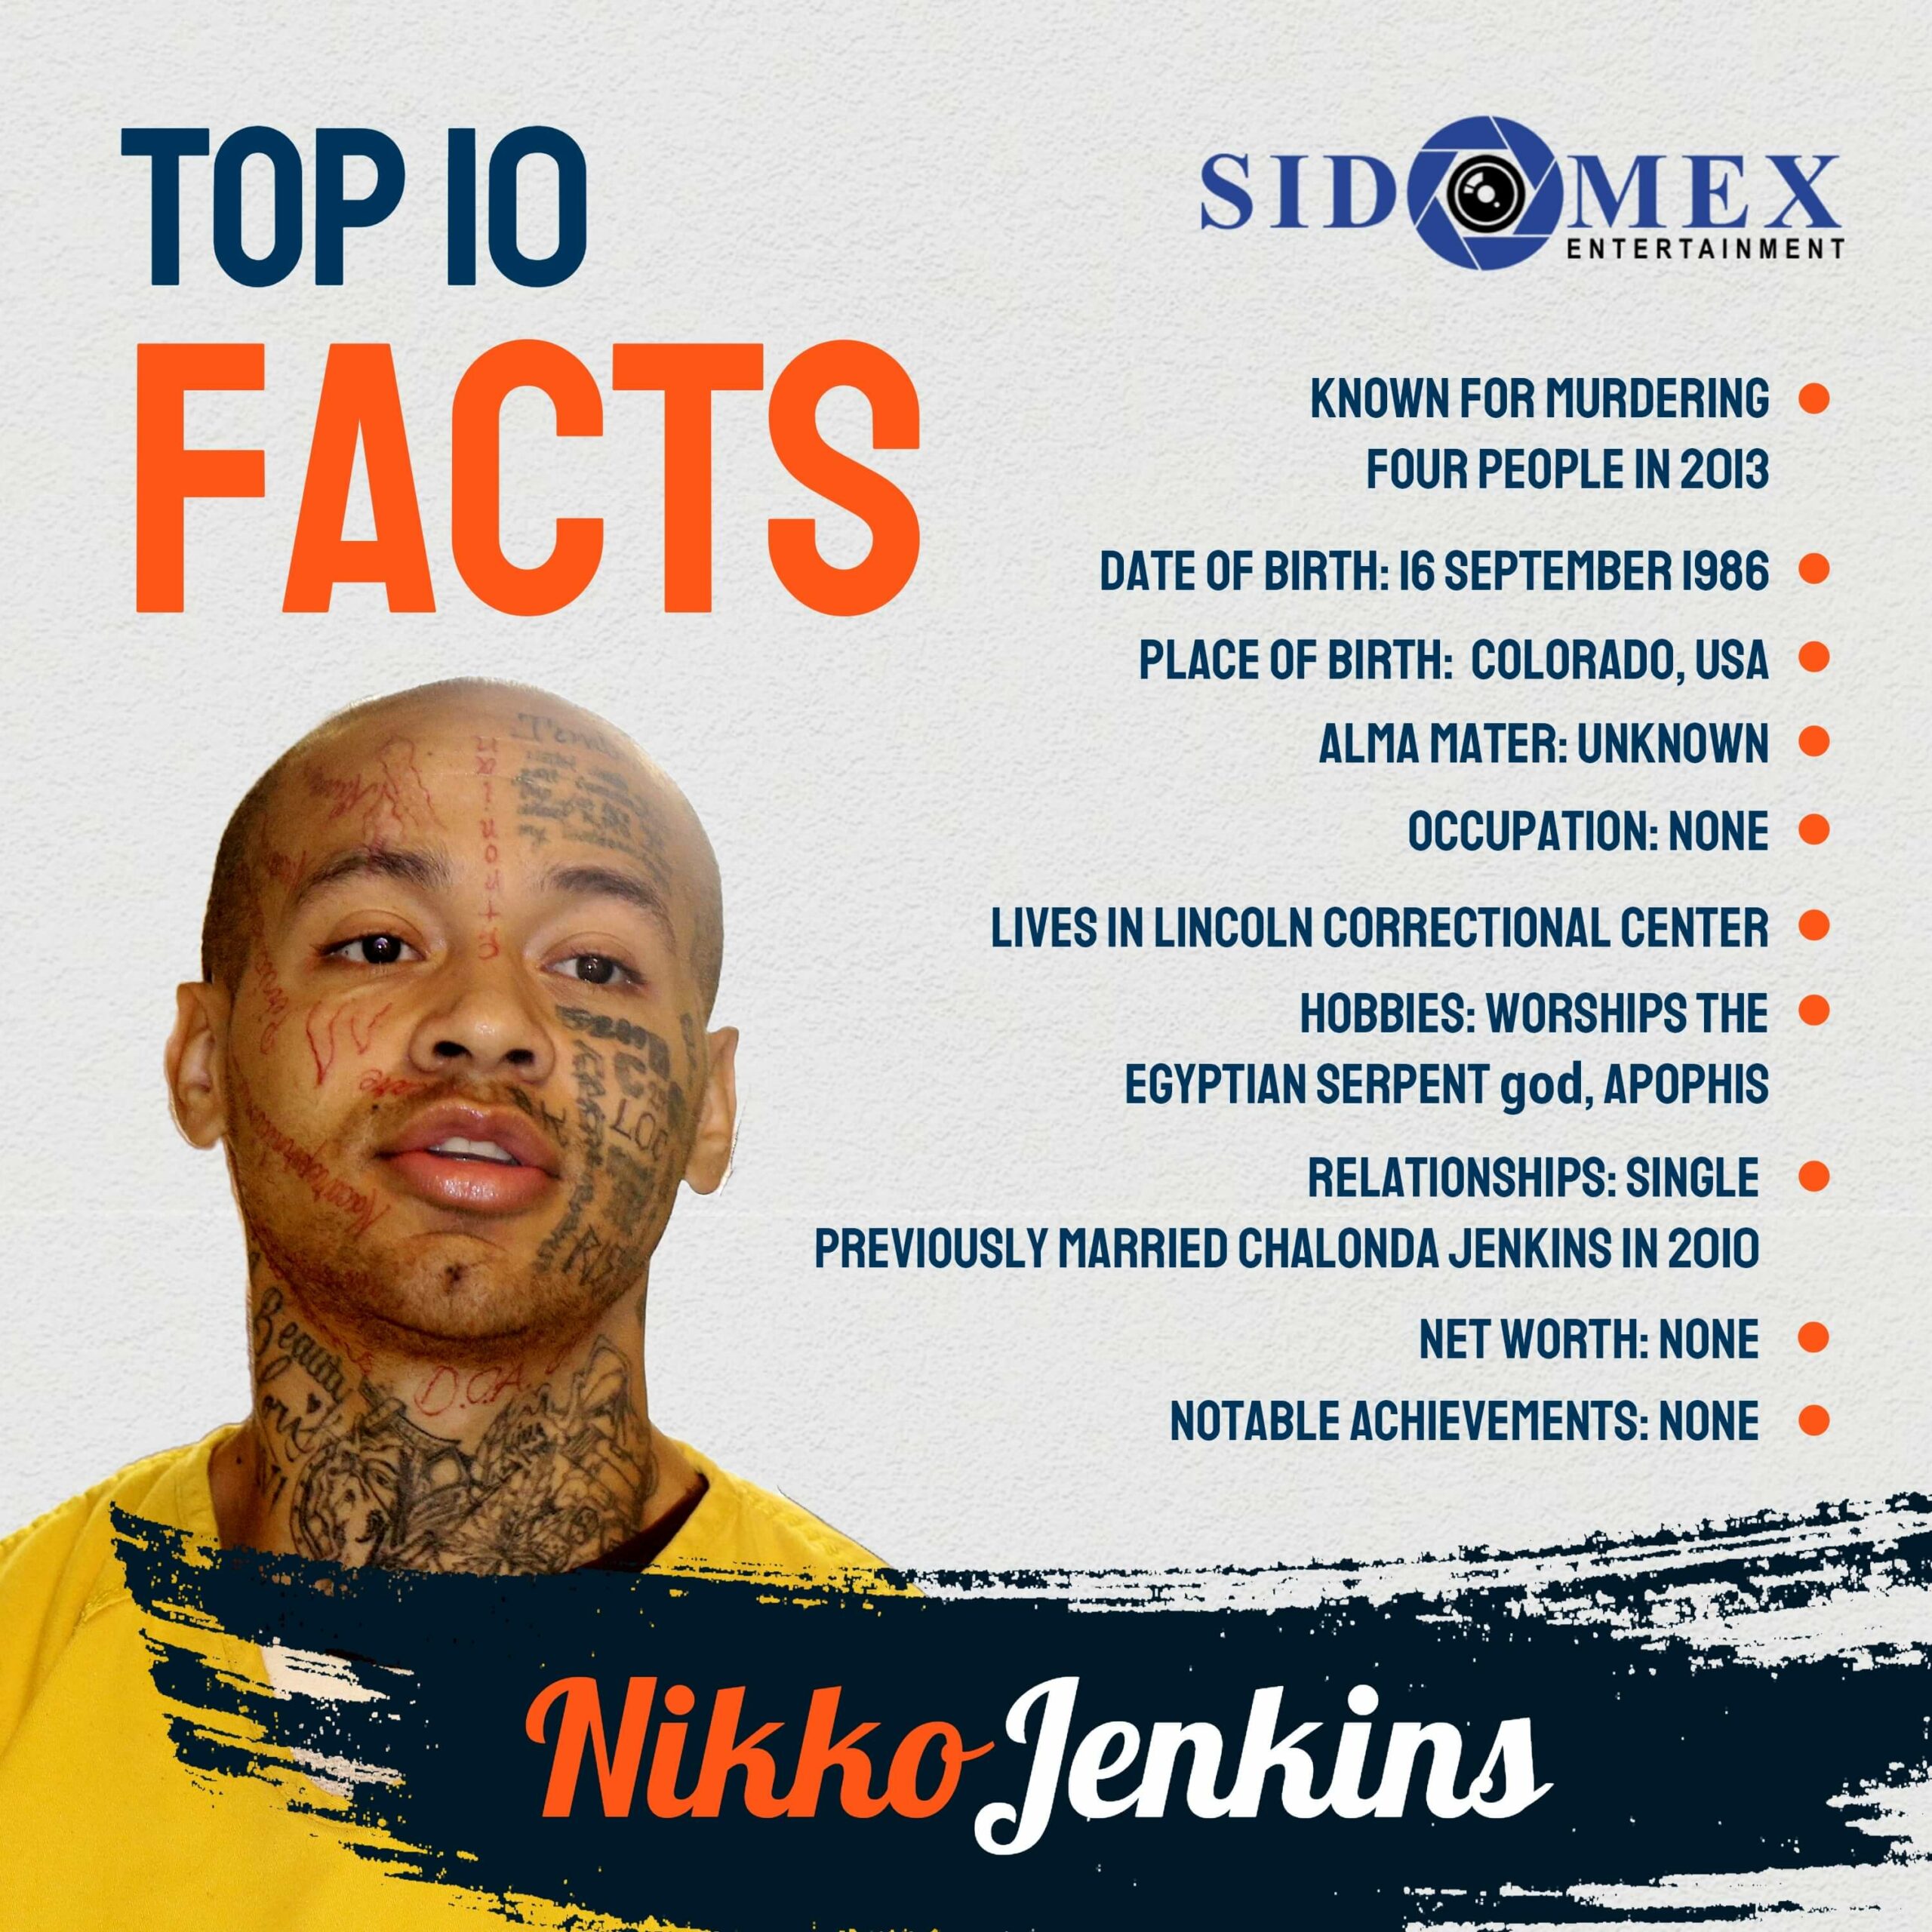 Nikko Jenkins biography: death row inmate, murdered Andrea Kruger, family and wife